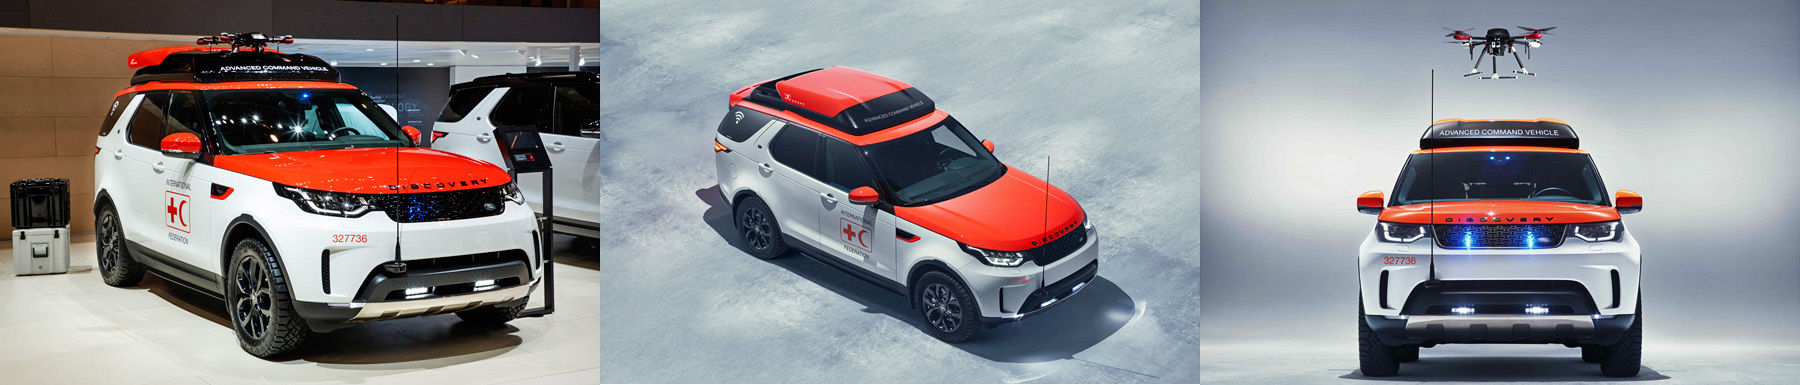 Land Rover Discovery Project Hero Created to Assist Red Cross in Saving Lives